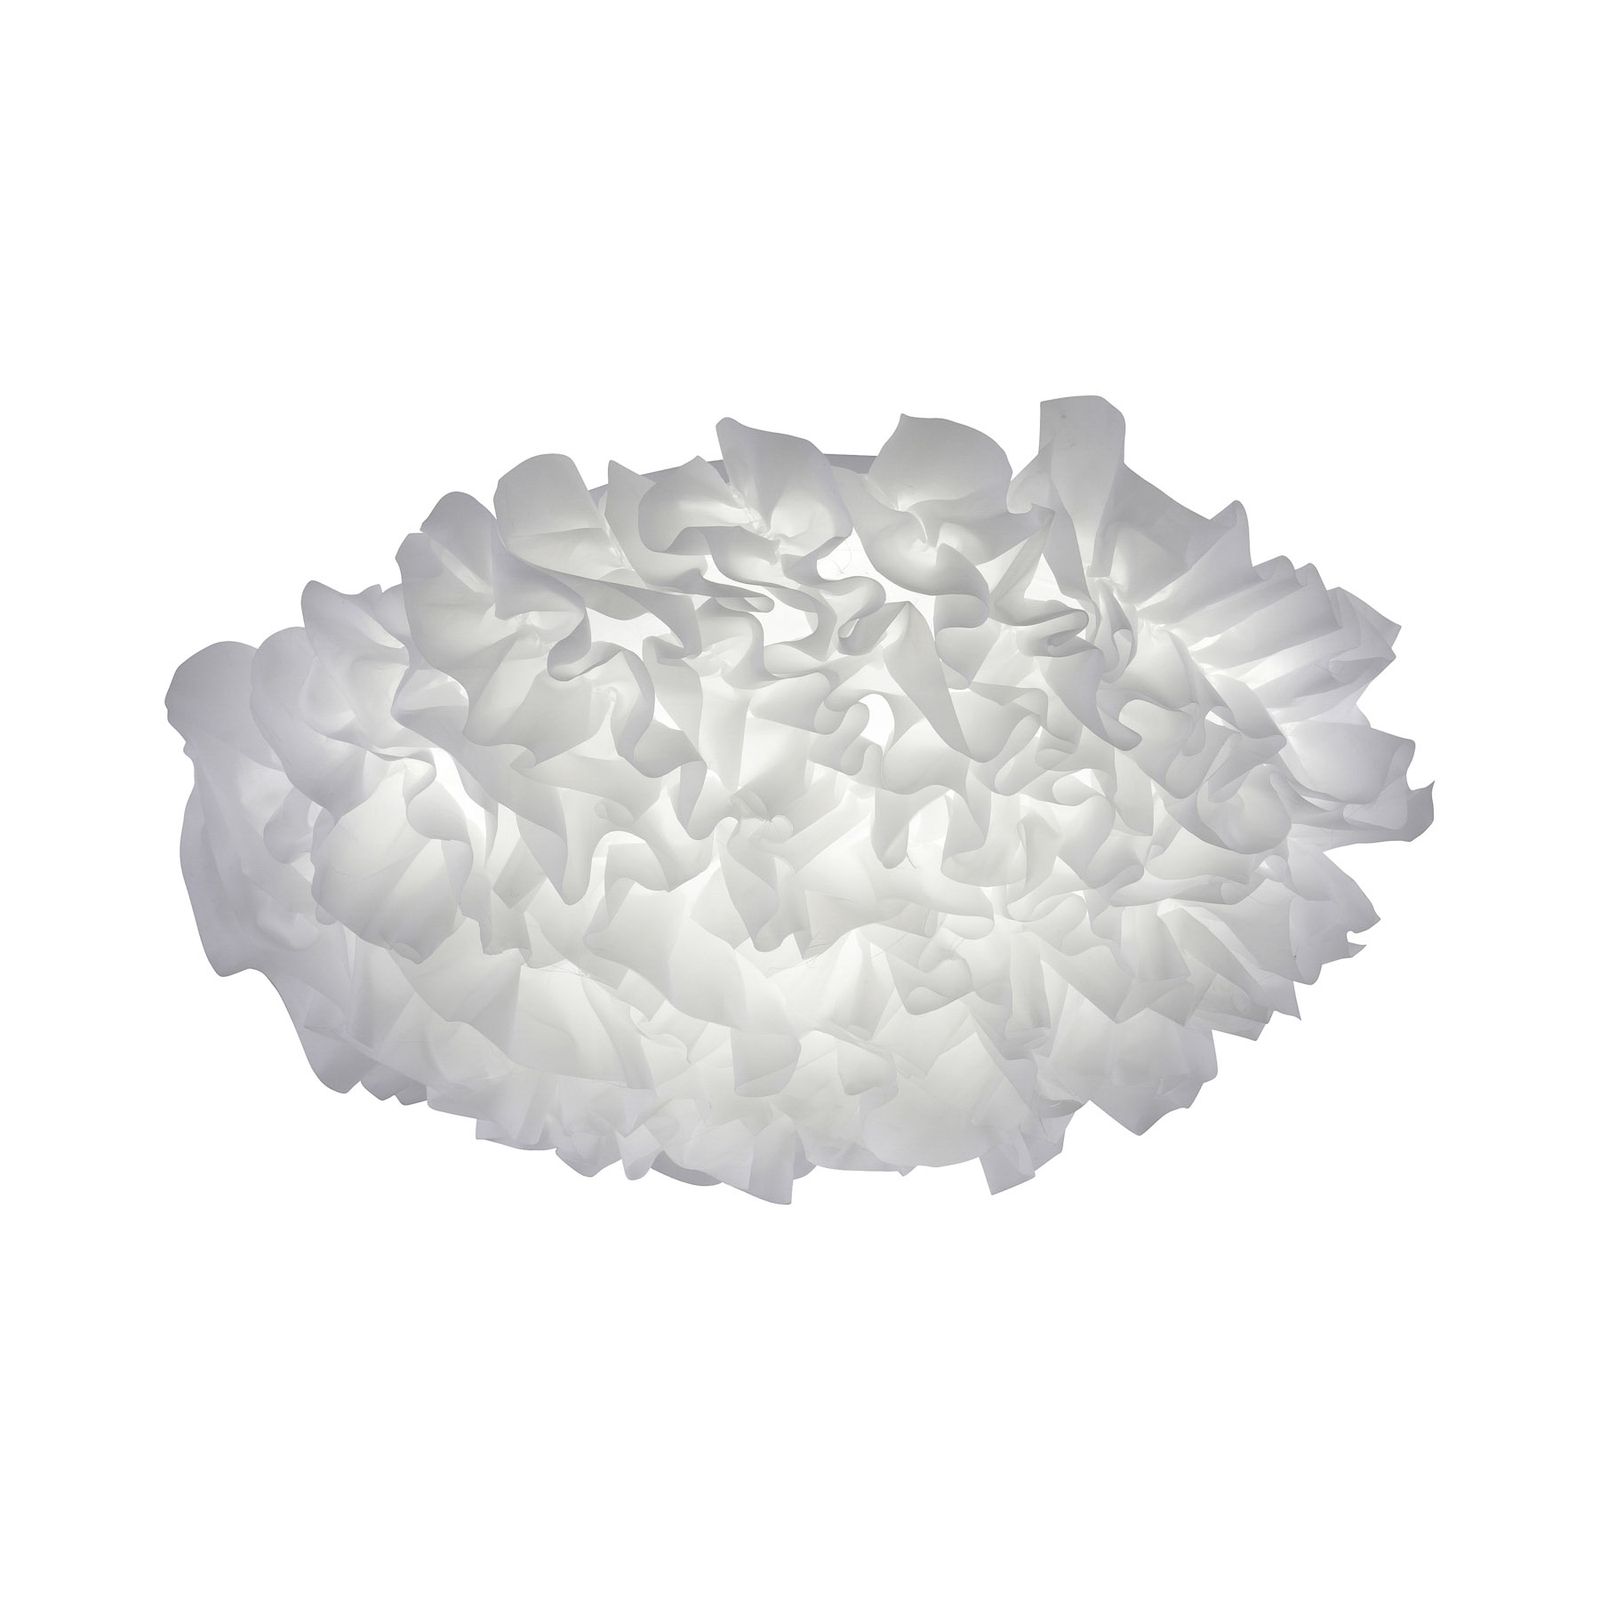 Xenia LED ceiling lamp, dimmable, Ø 50cm